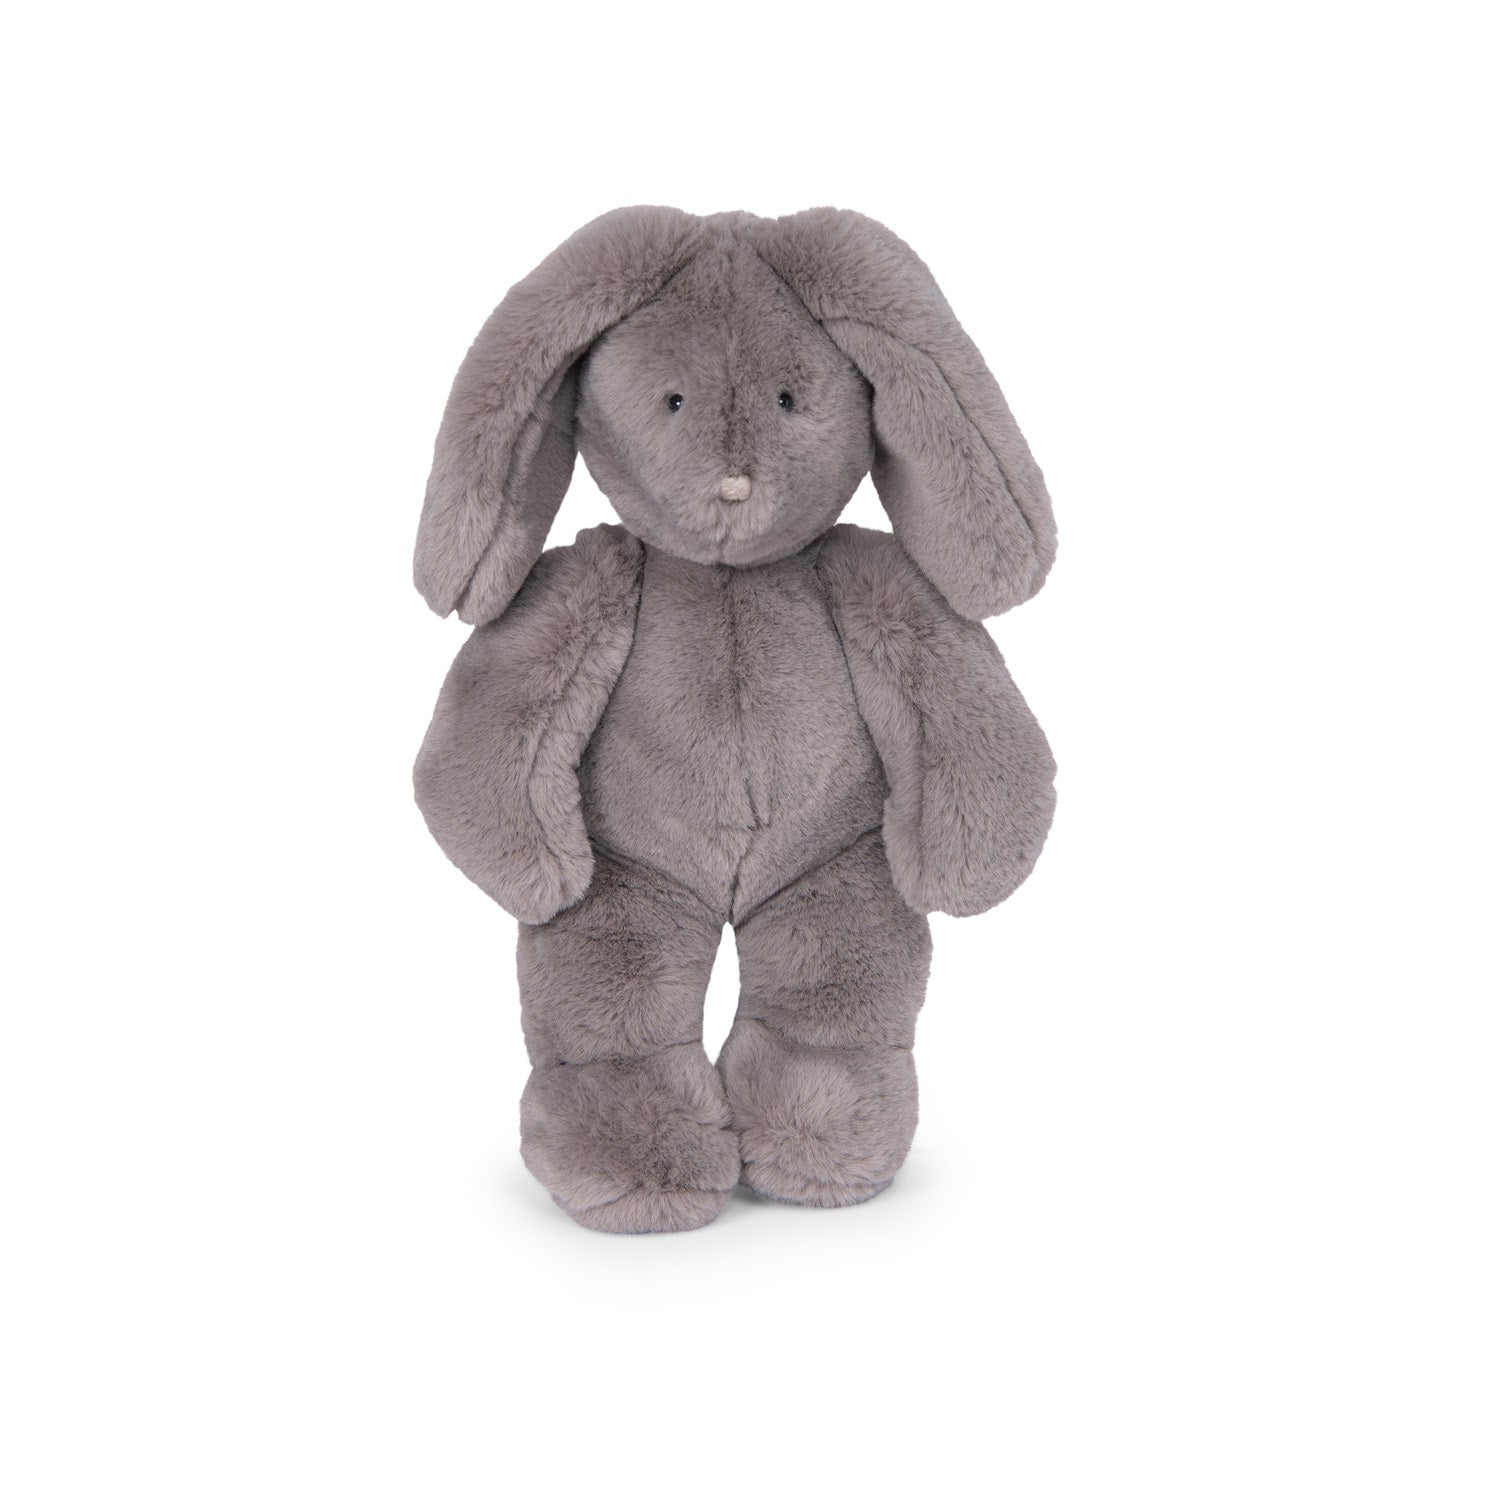 <h5>Description</h5>
<p>This charming rabbit with super-soft grey fur is called Louison and she just loves cuddles.<br>With her cute little nose to kiss and great big ears to pet, she is easy to grab and will become your little one&#39;s best friend. (Oeko-Tex fur)   </p>
<h5>Specifications</h5>
<p> <strong>Color</strong>: Gray<br><strong>Recommended Age</strong>: 0+<br><strong>Material</strong>: # Cotton, polyester, plastic GPPS<br><strong>Size (inches)</strong>: L: 8 x W: 13 x H: 6<br><strong>Weight (lbs)</strong>: 0,363<br><strong>Care instructions</strong>: Machine washable at 30°C on wool cycle.No tumble dry.</p>
